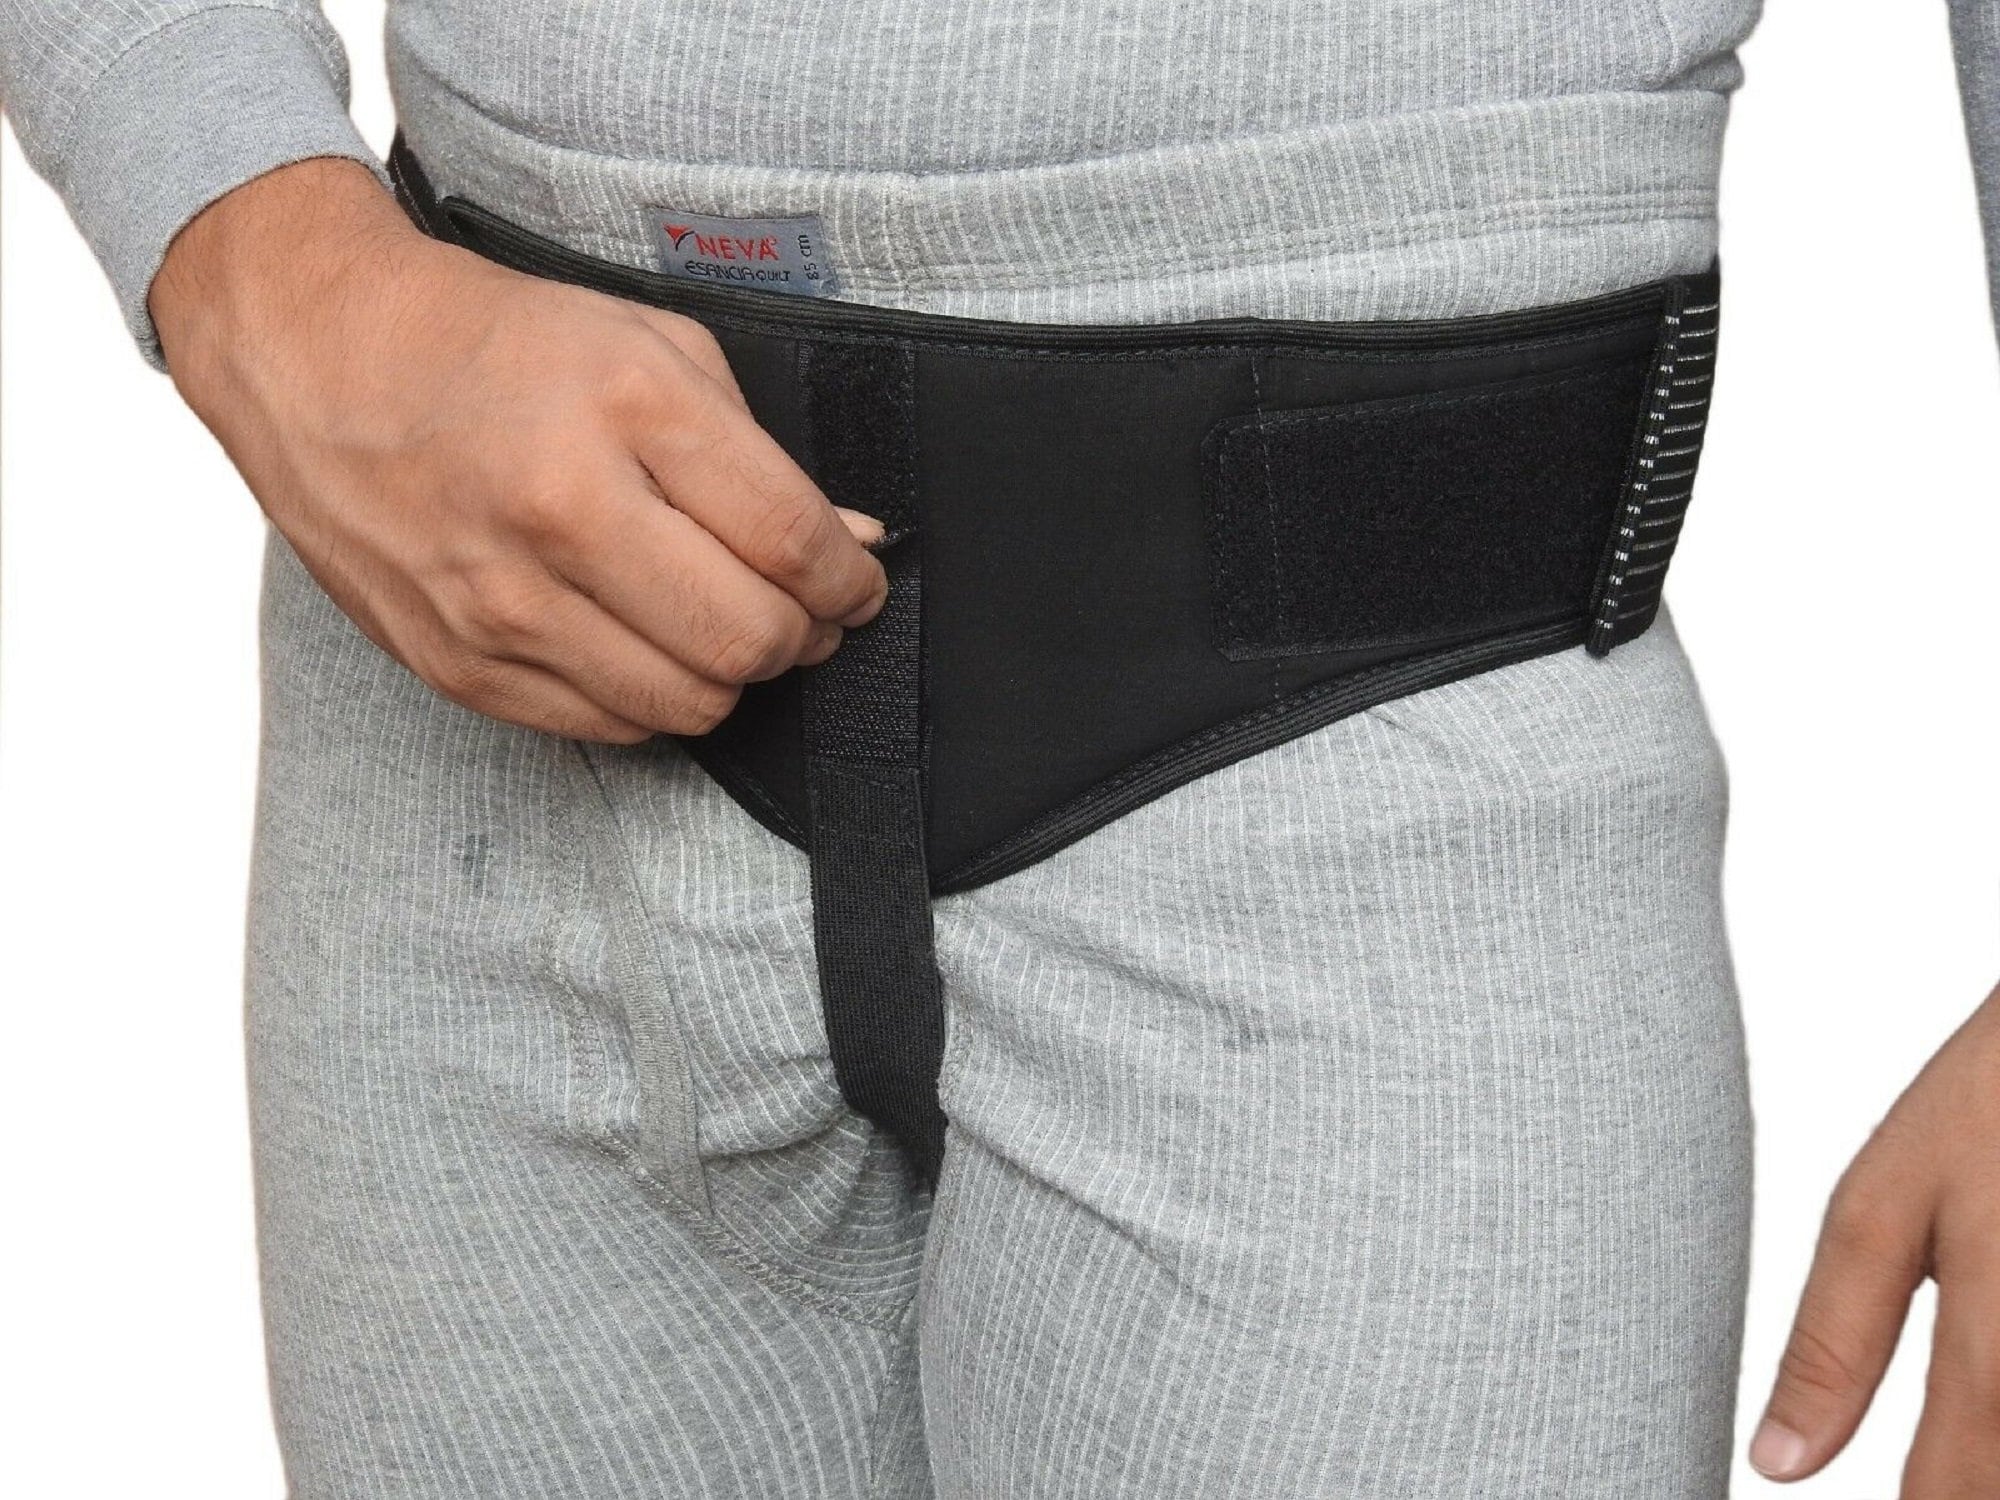 Single Side Hernia Belt Left Side Select Inguinal Groin Hernia Support  Truss Brace FREE SHIPPING, Black Hernia Belt for Pain Relief 